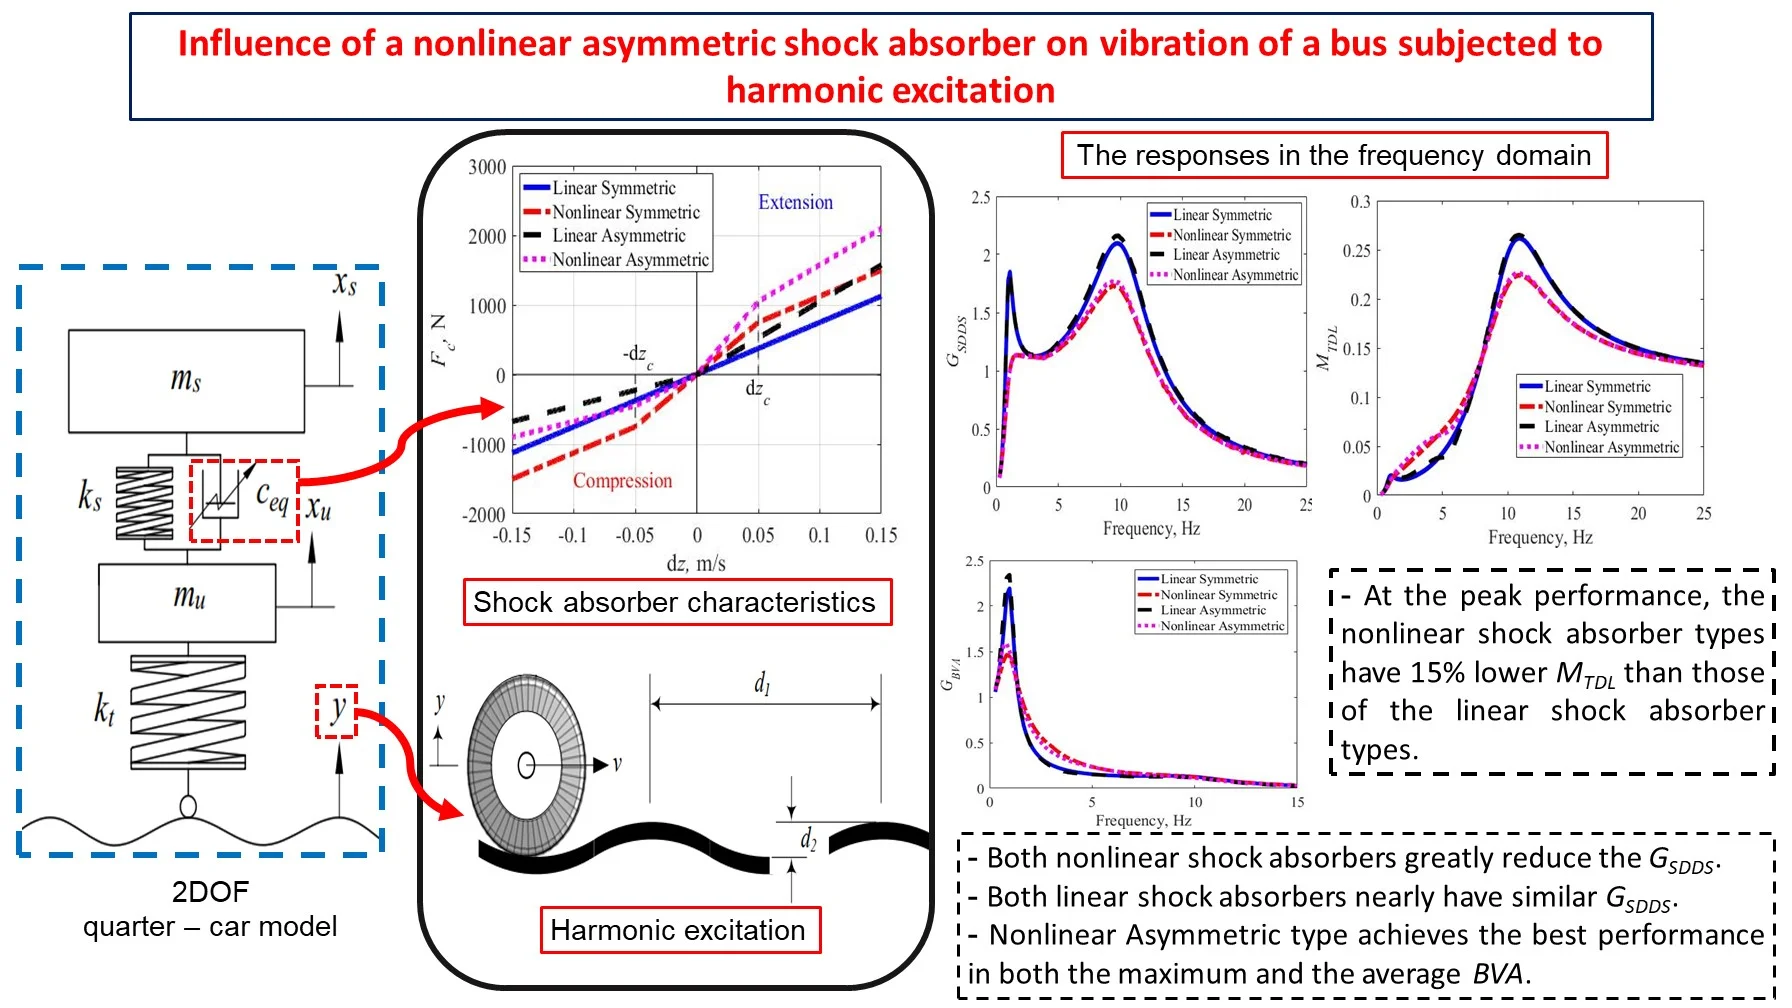 Influence of a nonlinear asymmetric shock absorber on vibration of a bus subjected to harmonic excitation